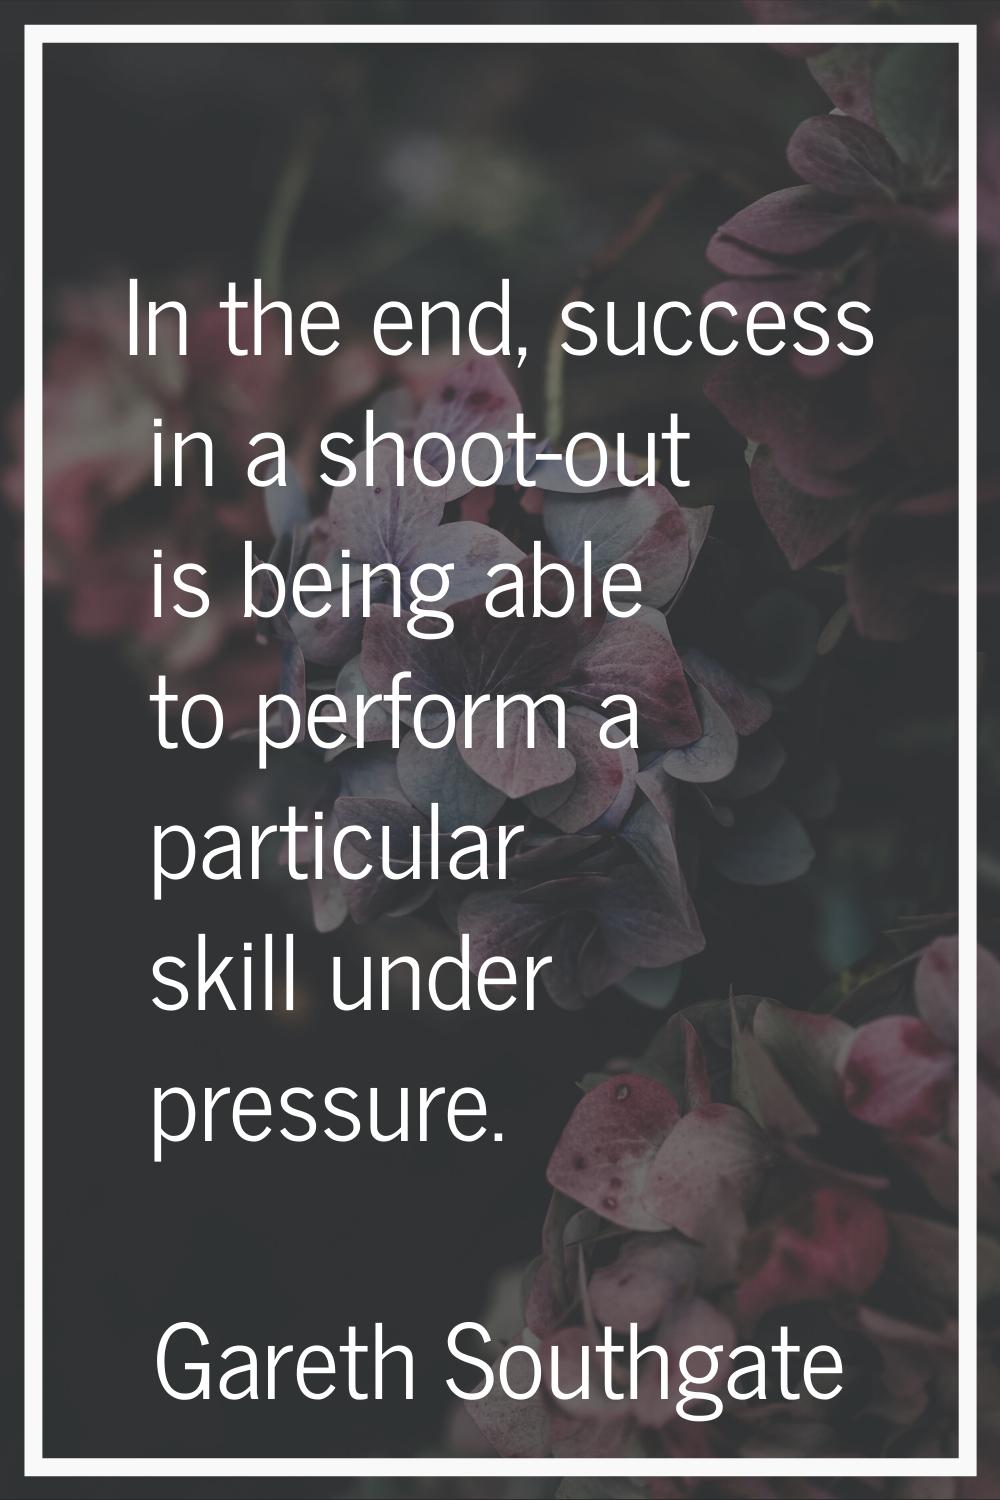 In the end, success in a shoot-out is being able to perform a particular skill under pressure.